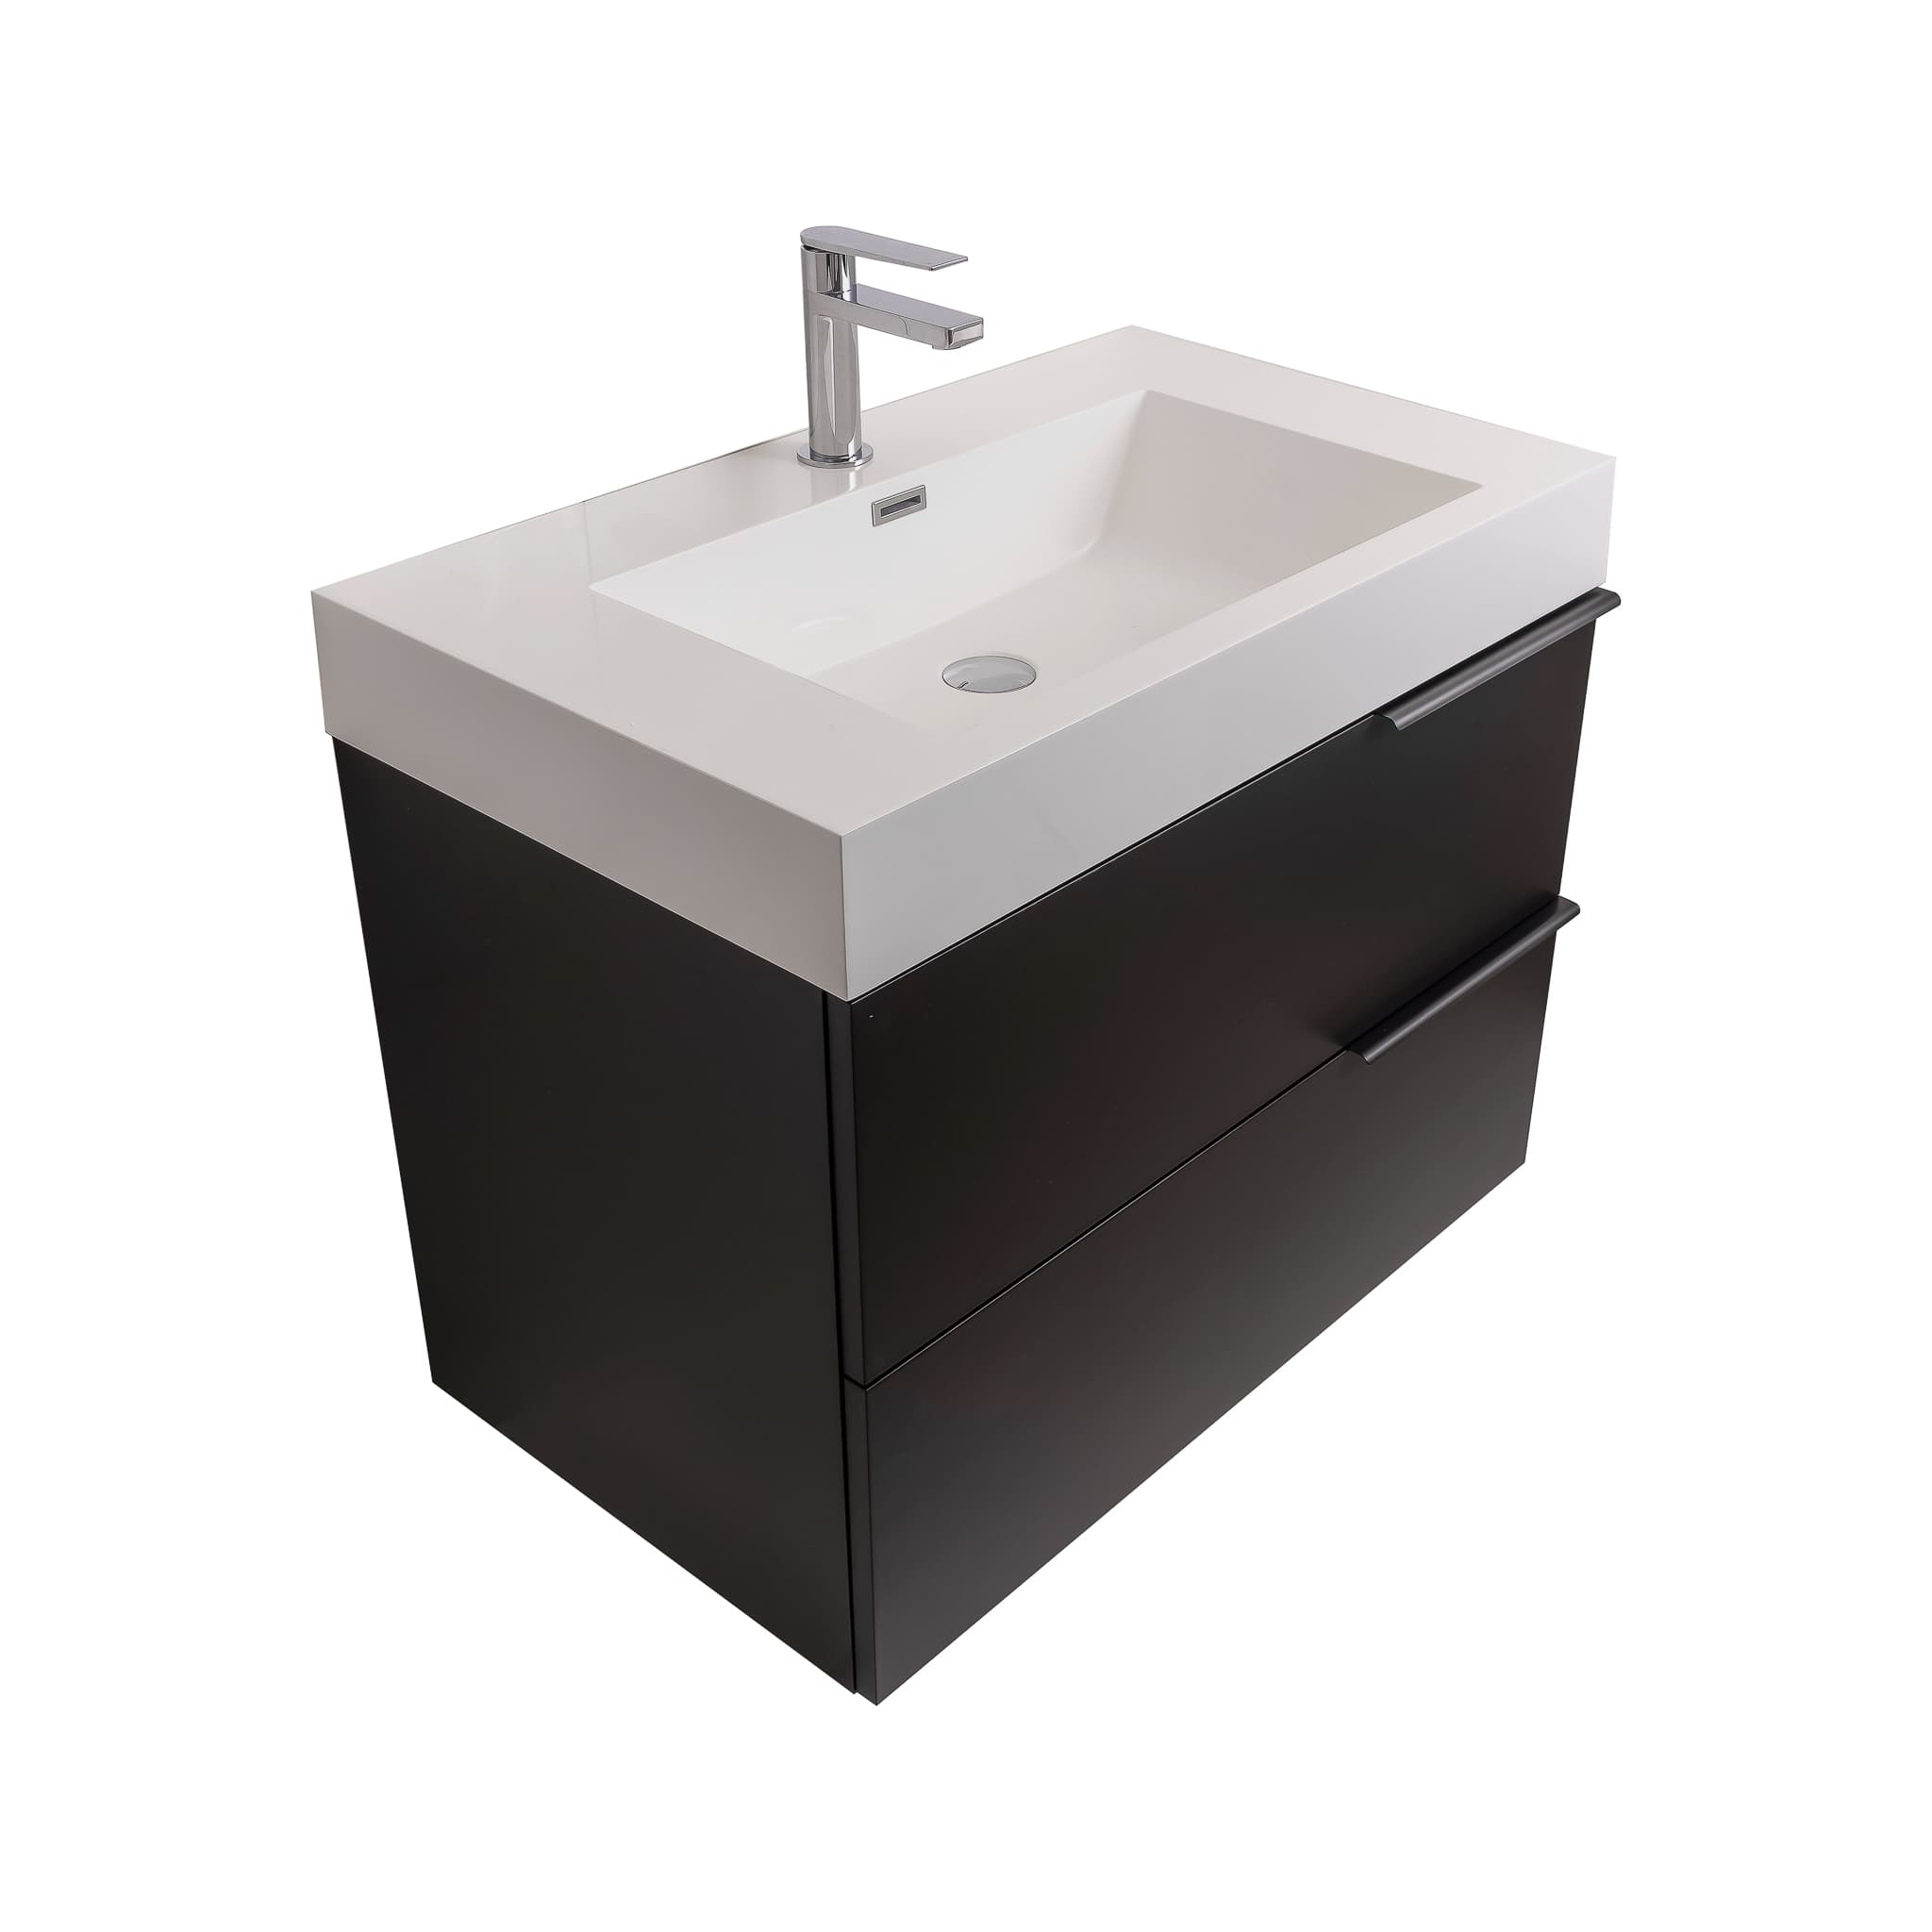 Mallorca 39.5 Matte Black Cabinet, Square Cultured Marble Sink, Wall Mounted Modern Vanity Set